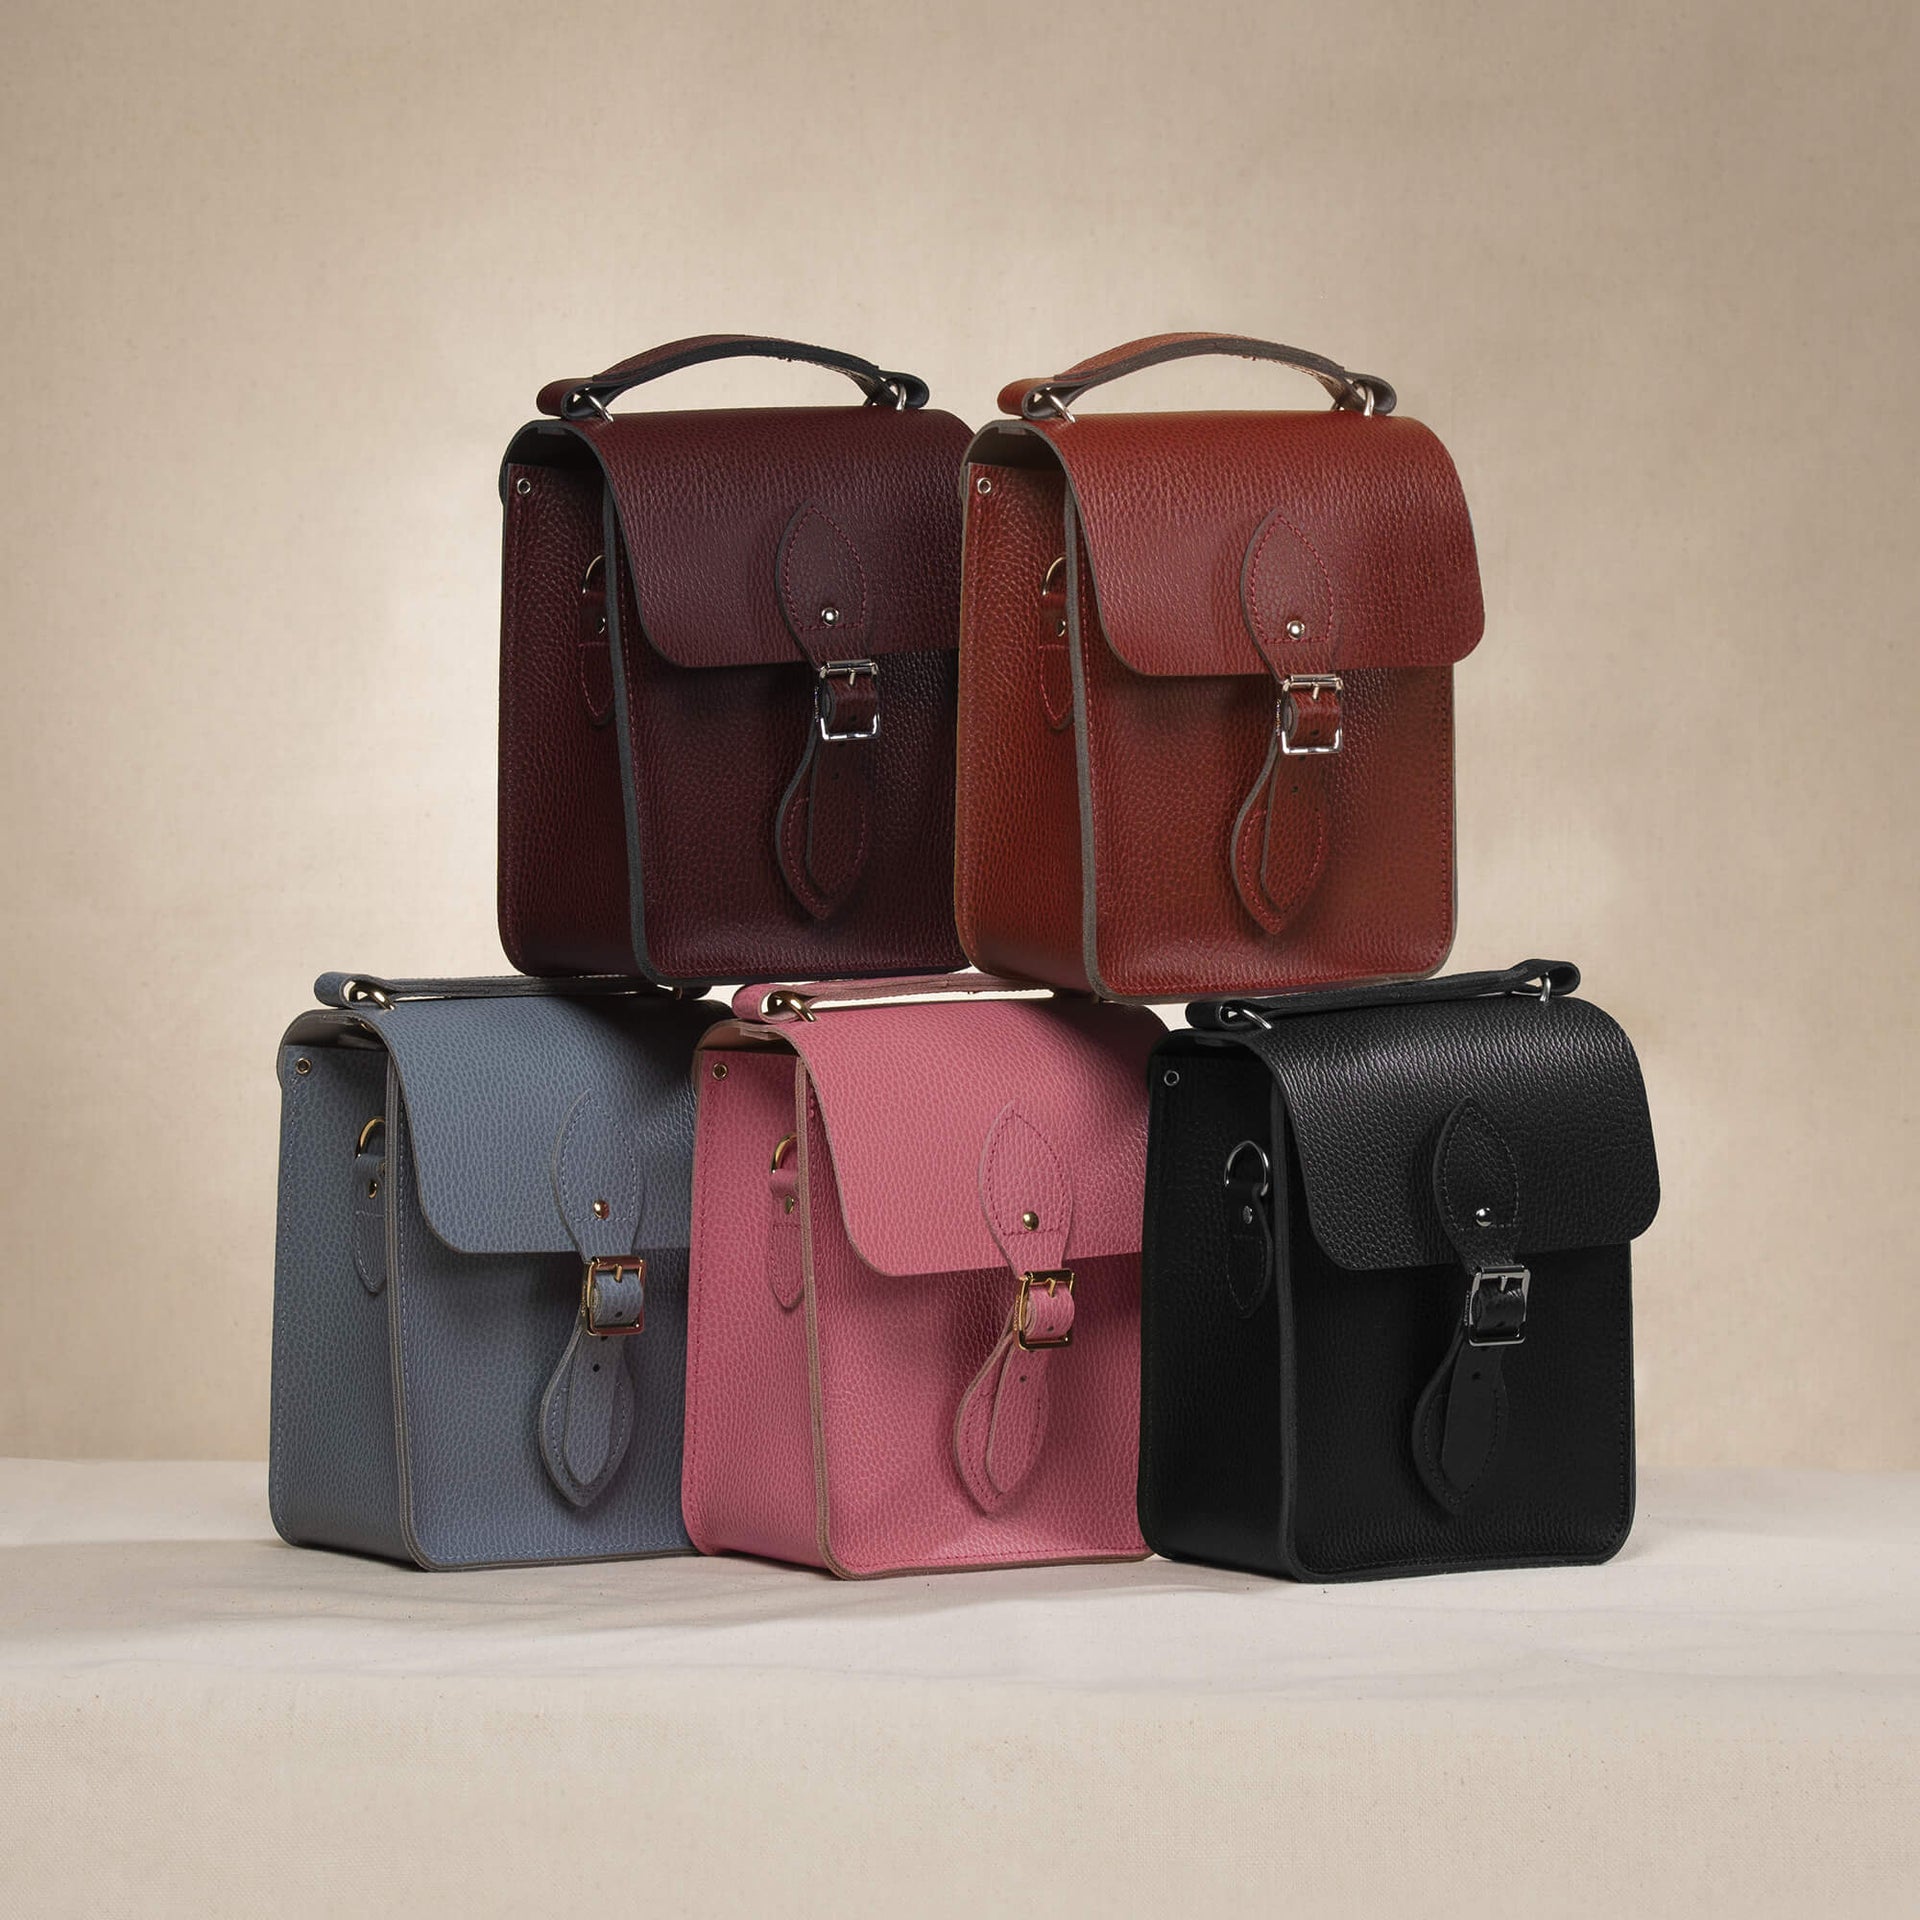 Introducing The Binocular Bag and our Reinvented Small Goods - Cambridge Satchel US Store